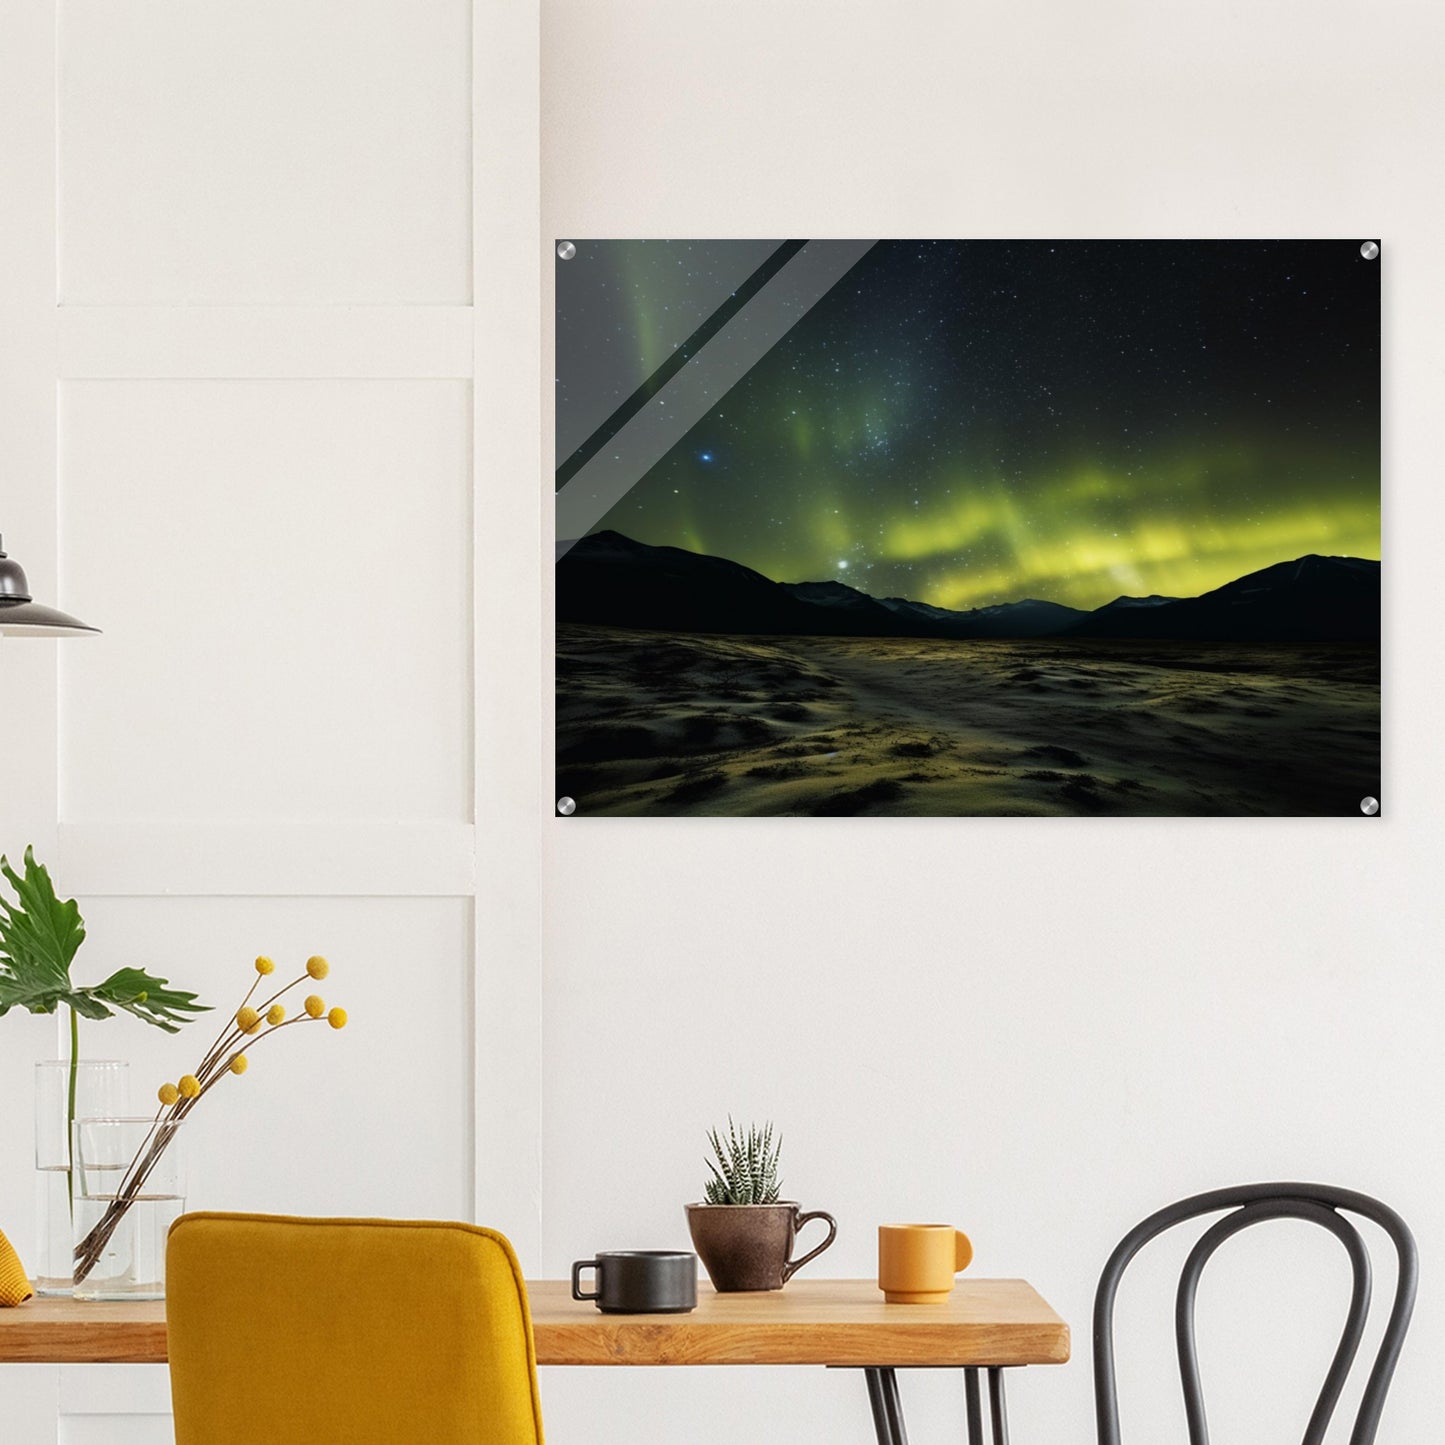 Unique Aurora Borealis Acrylic Prints - Multi Size Personalized Northern Light View - Modern Wall Art - Perfect Aurora Lovers Gift 7